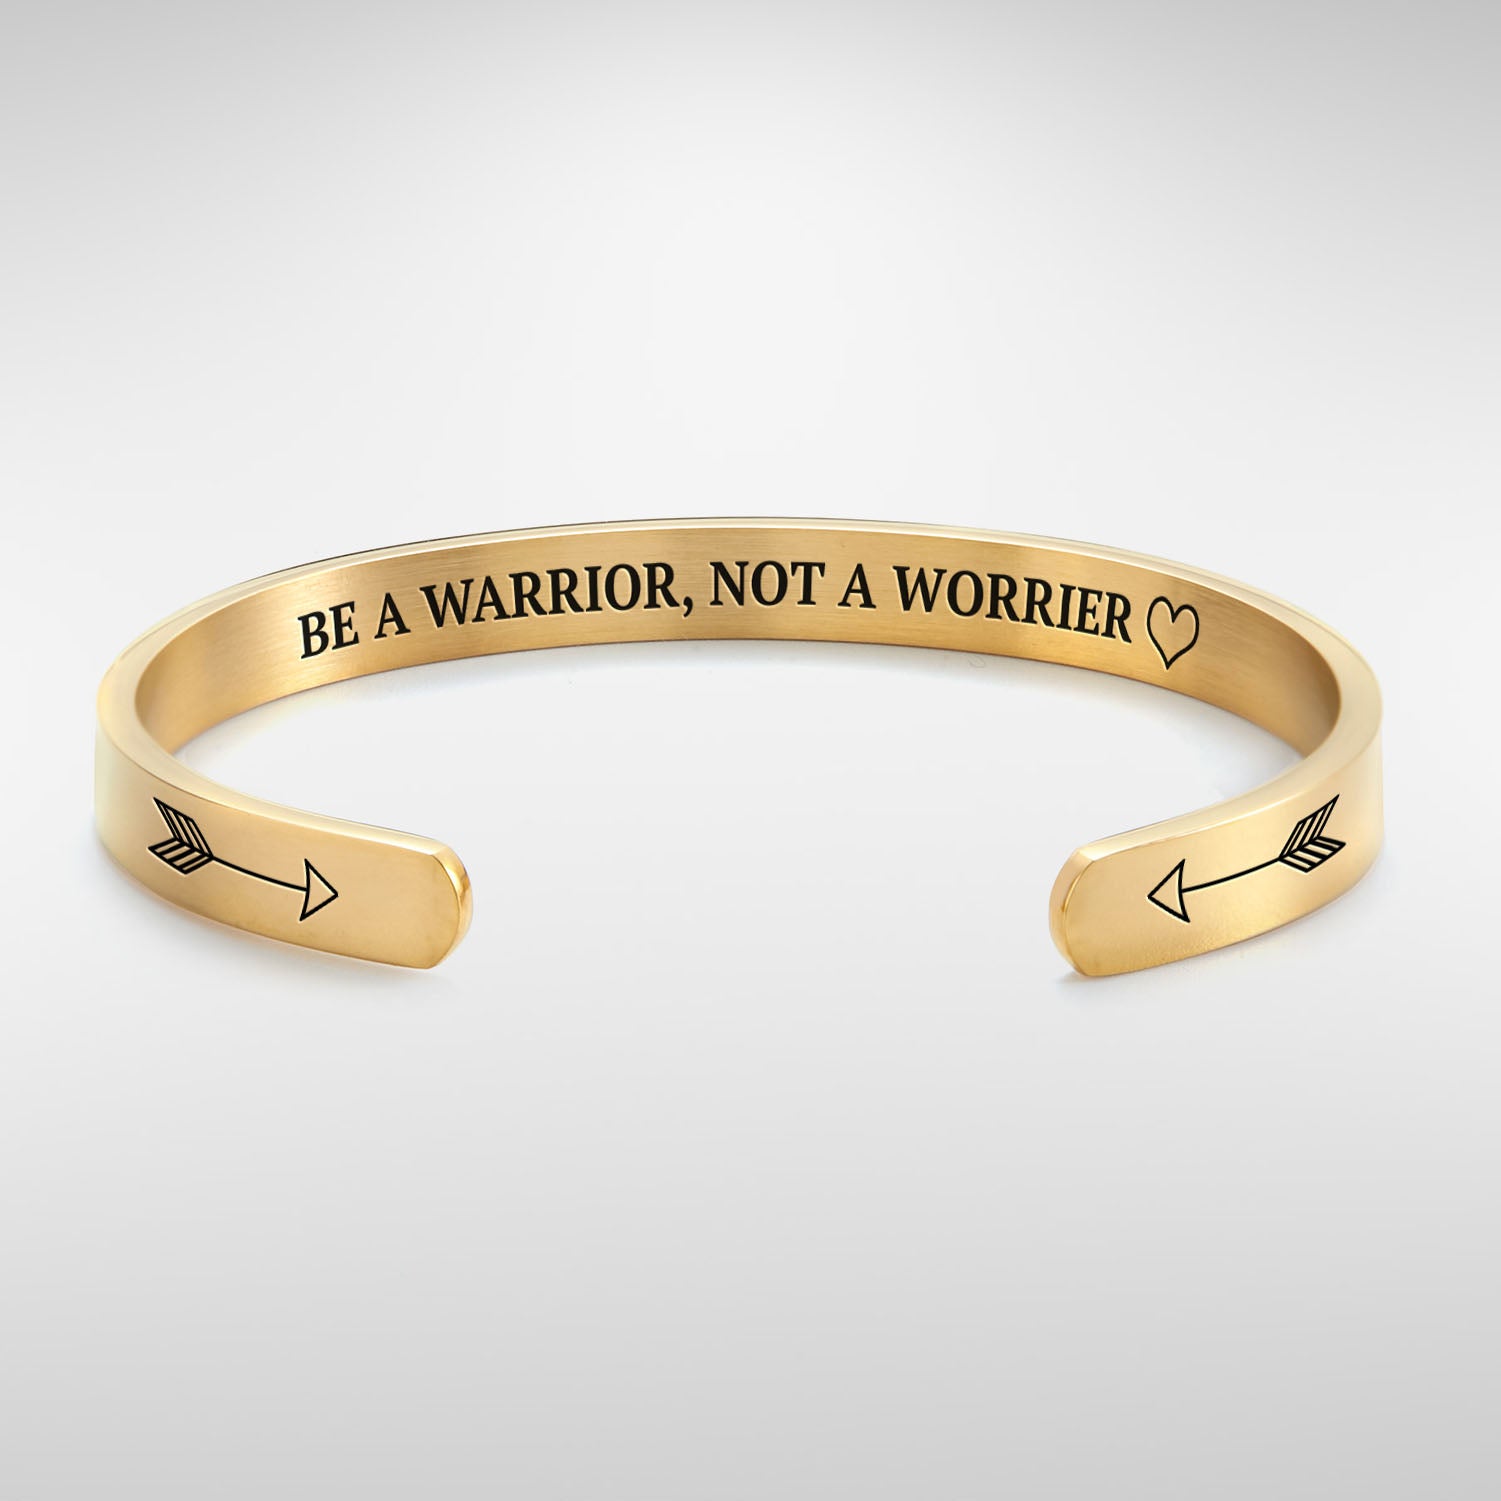 Be a warrior, not a worrier bracelet with gold plating